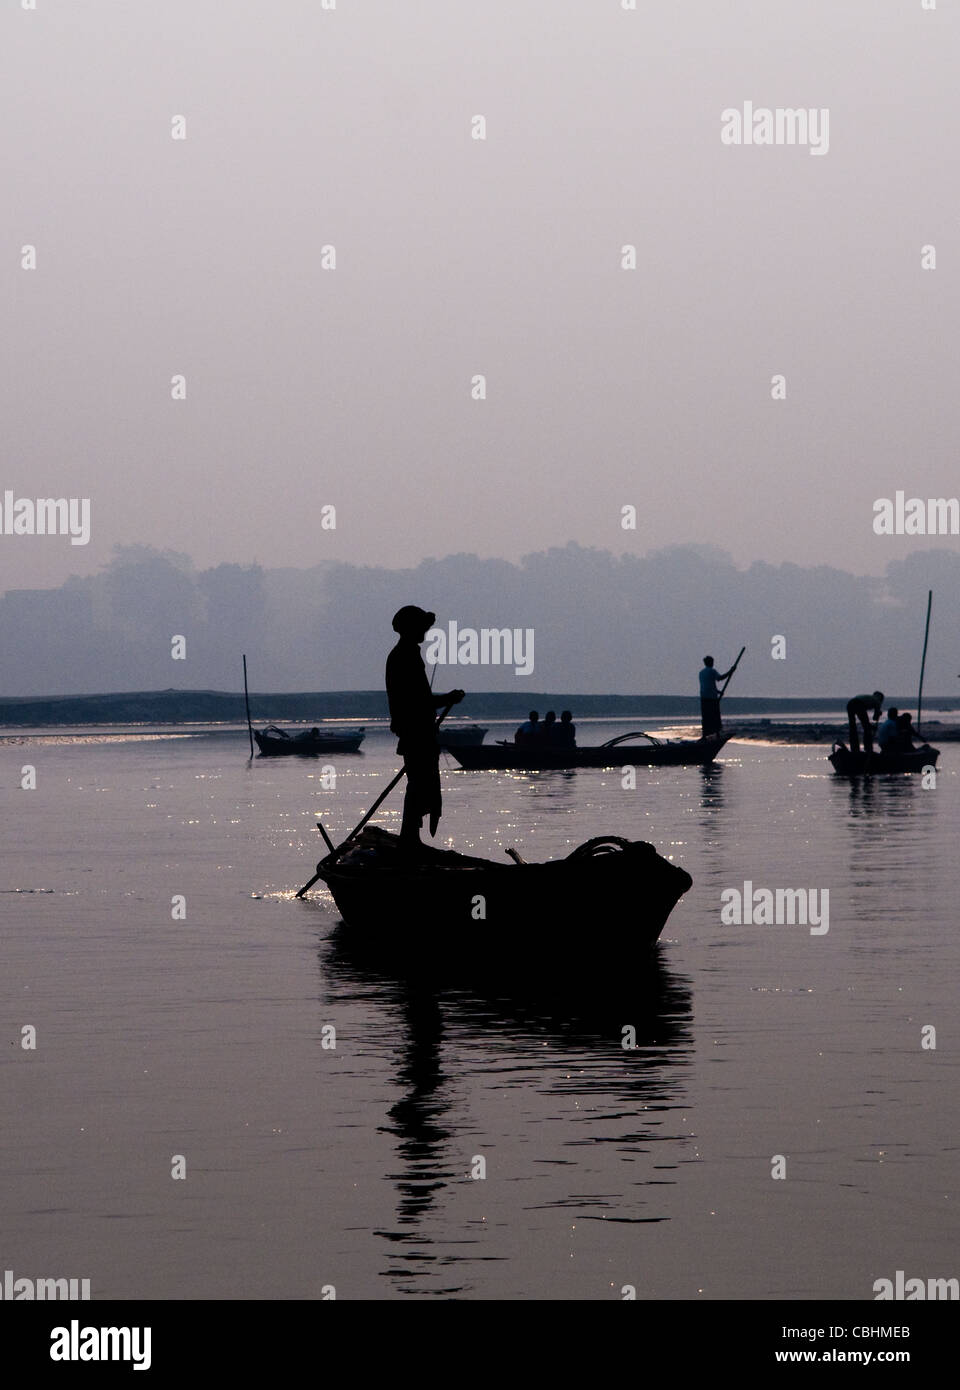 An Indian fisherman rowing his boat during sunrise on the Gandak river in Bihar. Stock Photo